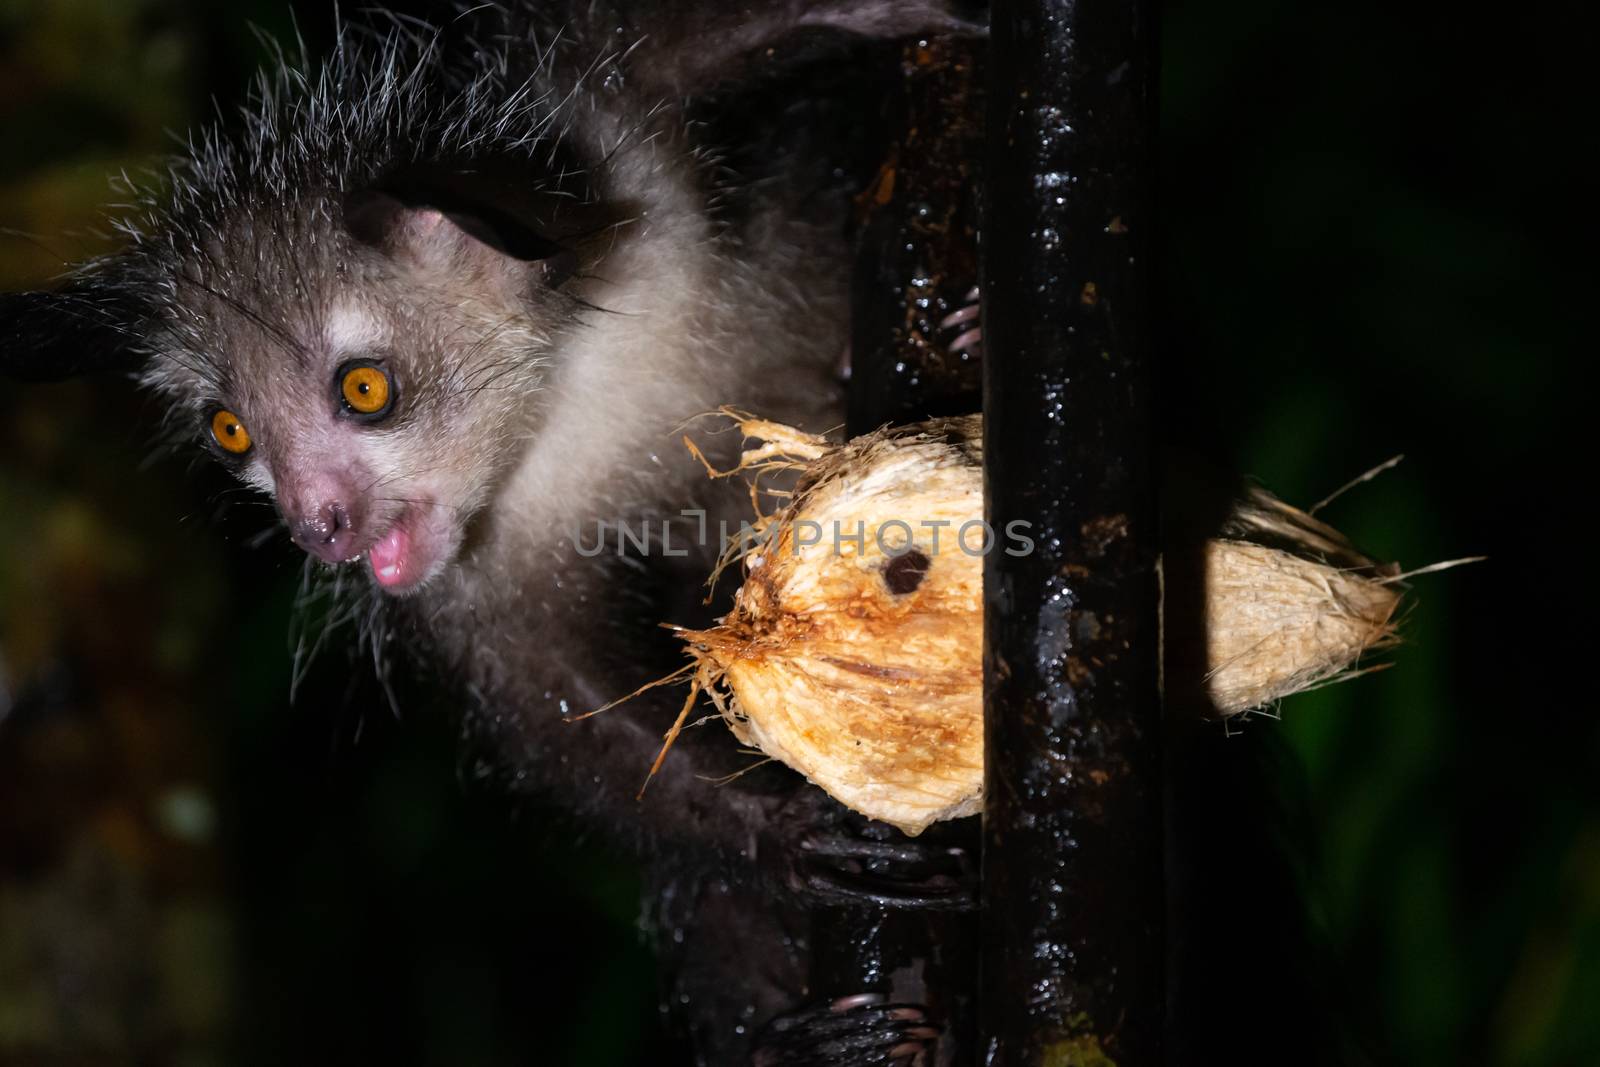 One rare, nocturnal aye-aye lemur with a coconut